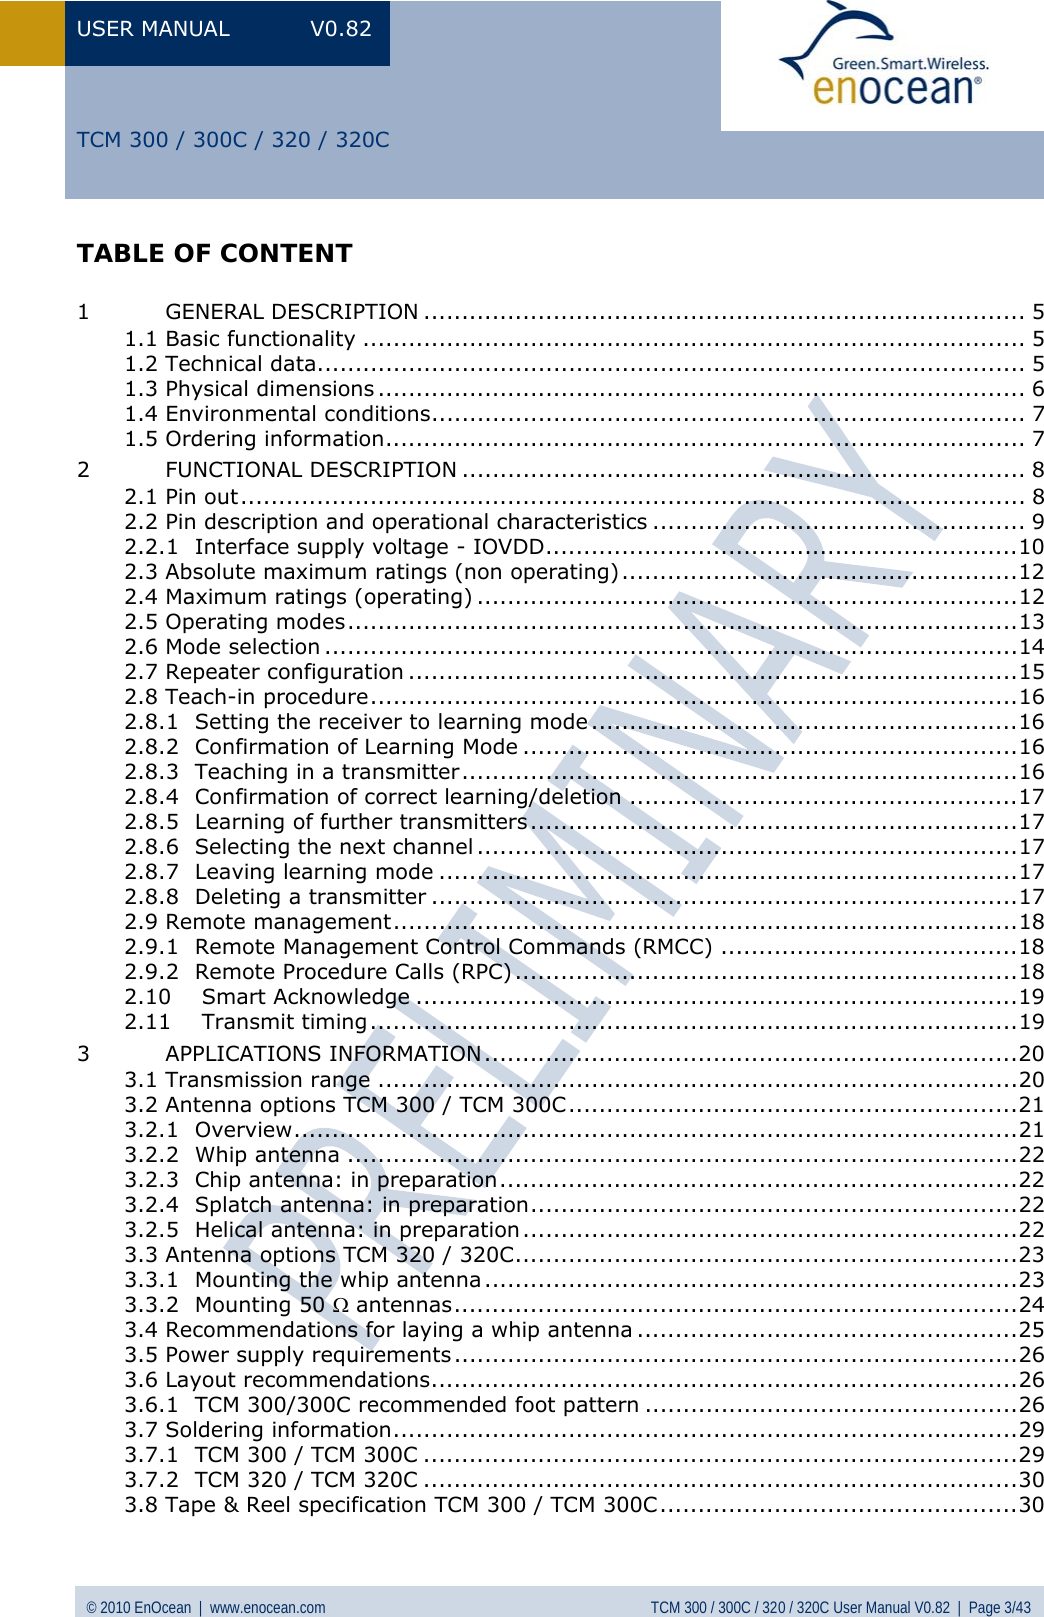 USER MANUAL V0.82 © 2010 EnOcean  |  www.enocean.com  TCM 300 / 300C / 320 / 320C User Manual V0.82  |  Page 3/43   TCM 300 / 300C / 320 / 320C TABLE OF CONTENT  1 GENERAL DESCRIPTION ............................................................................... 5 1.1 Basic functionality ....................................................................................... 5 1.2 Technical data............................................................................................. 5 1.3 Physical dimensions ..................................................................................... 6 1.4 Environmental conditions.............................................................................. 7 1.5 Ordering information.................................................................................... 7 2 FUNCTIONAL DESCRIPTION .......................................................................... 8 2.1 Pin out....................................................................................................... 8 2.2 Pin description and operational characteristics ................................................. 9 2.2.1 Interface supply voltage - IOVDD..............................................................10 2.3 Absolute maximum ratings (non operating)....................................................12 2.4 Maximum ratings (operating) .......................................................................12 2.5 Operating modes........................................................................................13 2.6 Mode selection ...........................................................................................14 2.7 Repeater configuration ................................................................................15 2.8 Teach-in procedure.....................................................................................16 2.8.1 Setting the receiver to learning mode ........................................................16 2.8.2 Confirmation of Learning Mode .................................................................16 2.8.3 Teaching in a transmitter.........................................................................16 2.8.4 Confirmation of correct learning/deletion ...................................................17 2.8.5 Learning of further transmitters................................................................17 2.8.6 Selecting the next channel .......................................................................17 2.8.7 Leaving learning mode ............................................................................17 2.8.8 Deleting a transmitter .............................................................................17 2.9 Remote management..................................................................................18 2.9.1 Remote Management Control Commands (RMCC) .......................................18 2.9.2 Remote Procedure Calls (RPC) ..................................................................18 2.10 Smart Acknowledge ...............................................................................19 2.11 Transmit timing.....................................................................................19 3 APPLICATIONS INFORMATION ......................................................................20 3.1 Transmission range ....................................................................................20 3.2 Antenna options TCM 300 / TCM 300C...........................................................21 3.2.1 Overview...............................................................................................21 3.2.2 Whip antenna ........................................................................................22 3.2.3 Chip antenna: in preparation....................................................................22 3.2.4 Splatch antenna: in preparation................................................................22 3.2.5 Helical antenna: in preparation.................................................................22 3.3 Antenna options TCM 320 / 320C..................................................................23 3.3.1 Mounting the whip antenna......................................................................23 3.3.2 Mounting 50 Ω antennas..........................................................................24 3.4 Recommendations for laying a whip antenna ..................................................25 3.5 Power supply requirements..........................................................................26 3.6 Layout recommendations.............................................................................26 3.6.1 TCM 300/300C recommended foot pattern .................................................26 3.7 Soldering information..................................................................................29 3.7.1 TCM 300 / TCM 300C ..............................................................................29 3.7.2 TCM 320 / TCM 320C ..............................................................................30 3.8 Tape &amp; Reel specification TCM 300 / TCM 300C...............................................30 